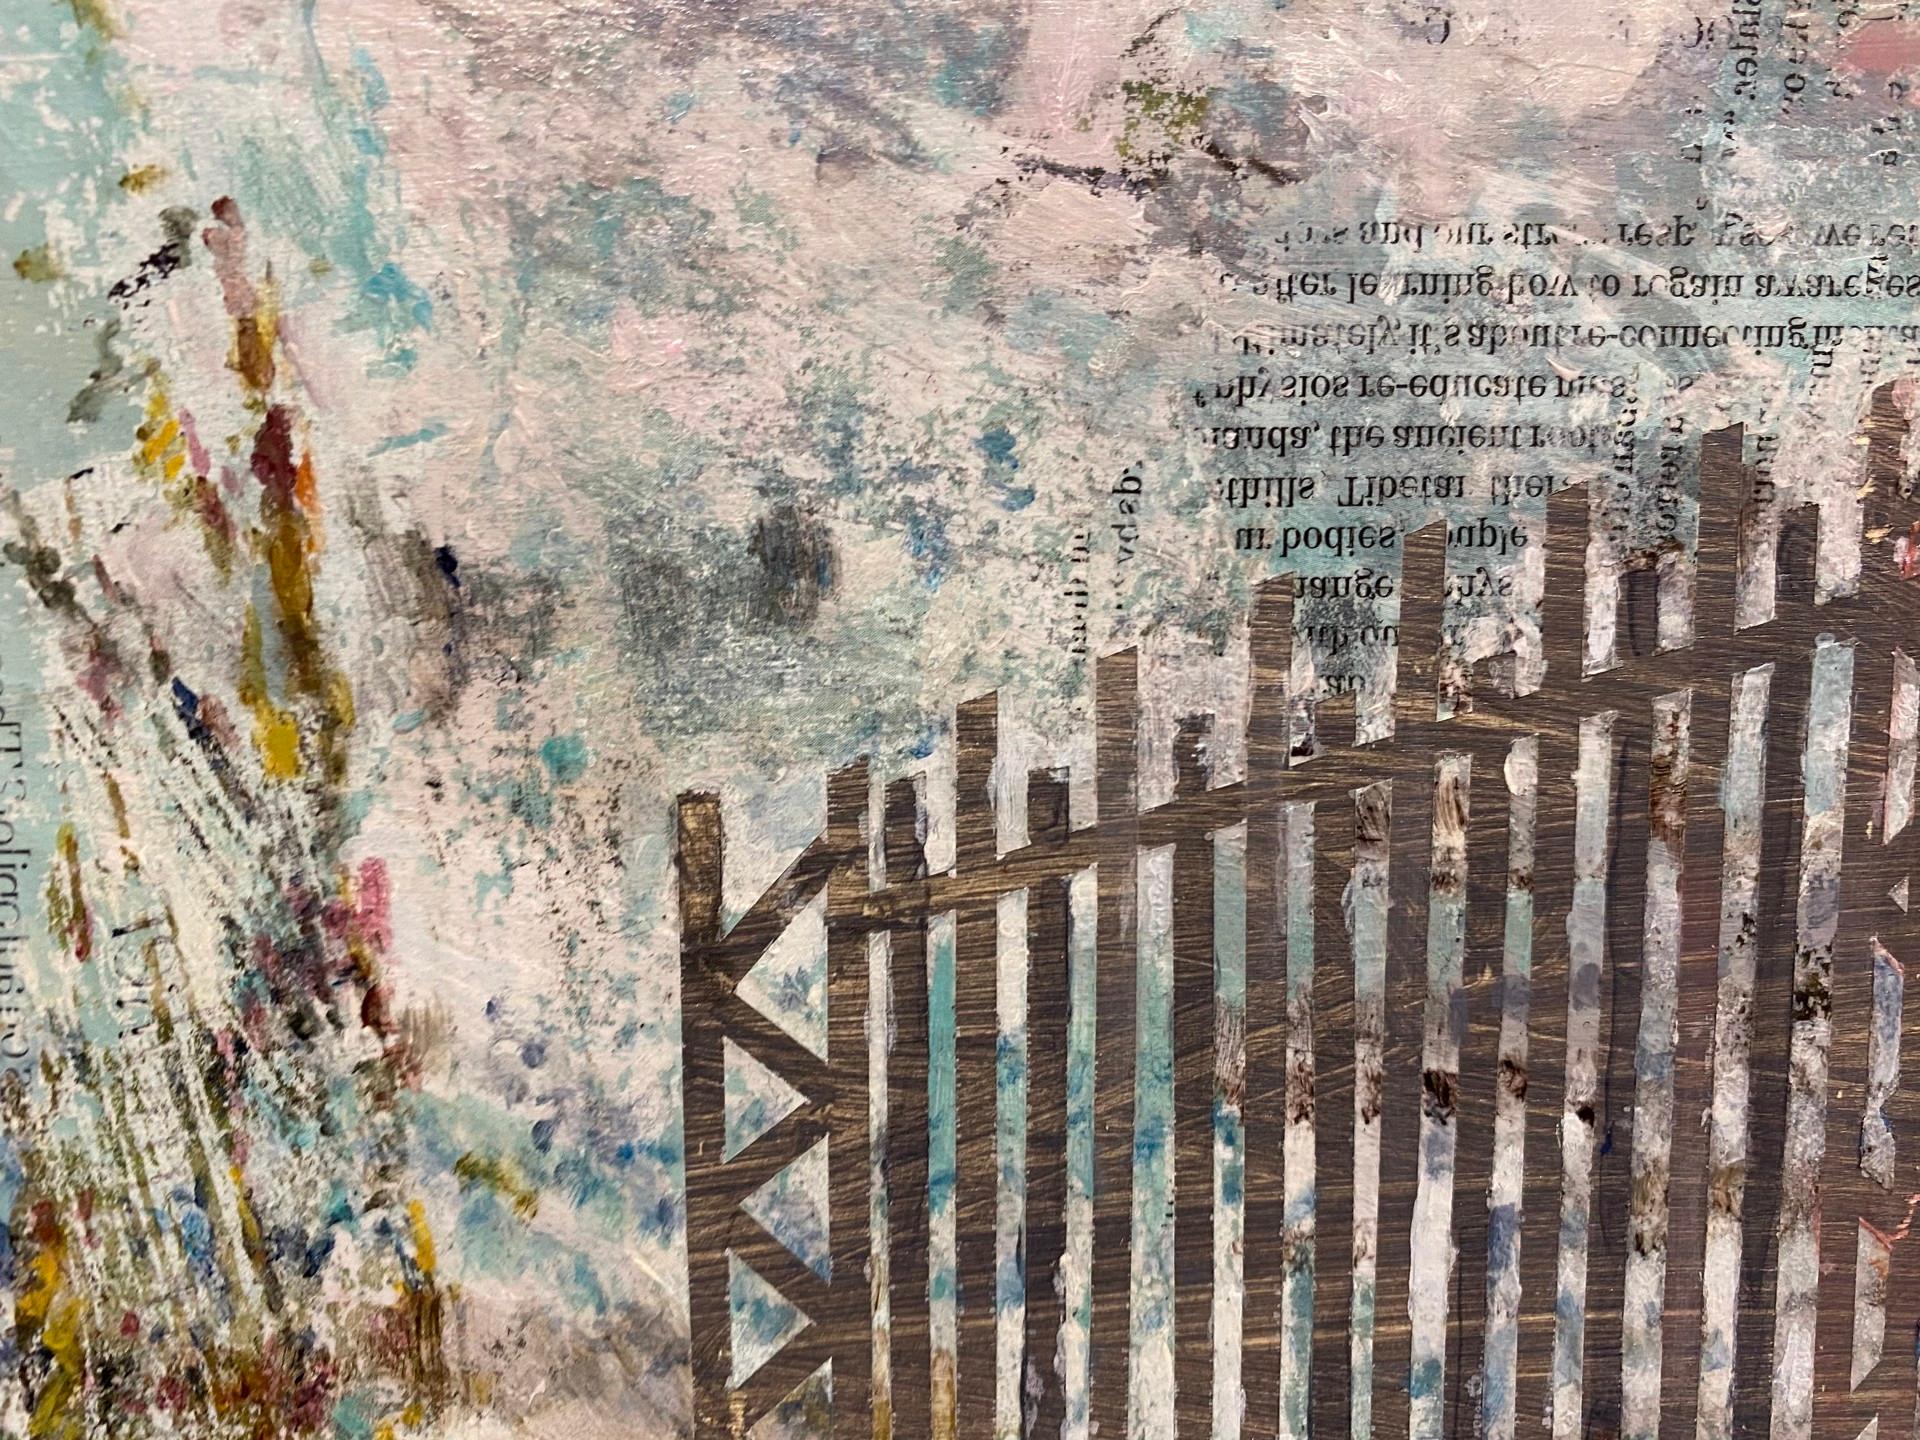 Mixed media on panel by artist Mandy Rogers Horton. Horton’s current body of art reflects on the ongoing construction of our lives and culture from eclectic and disparate sources.